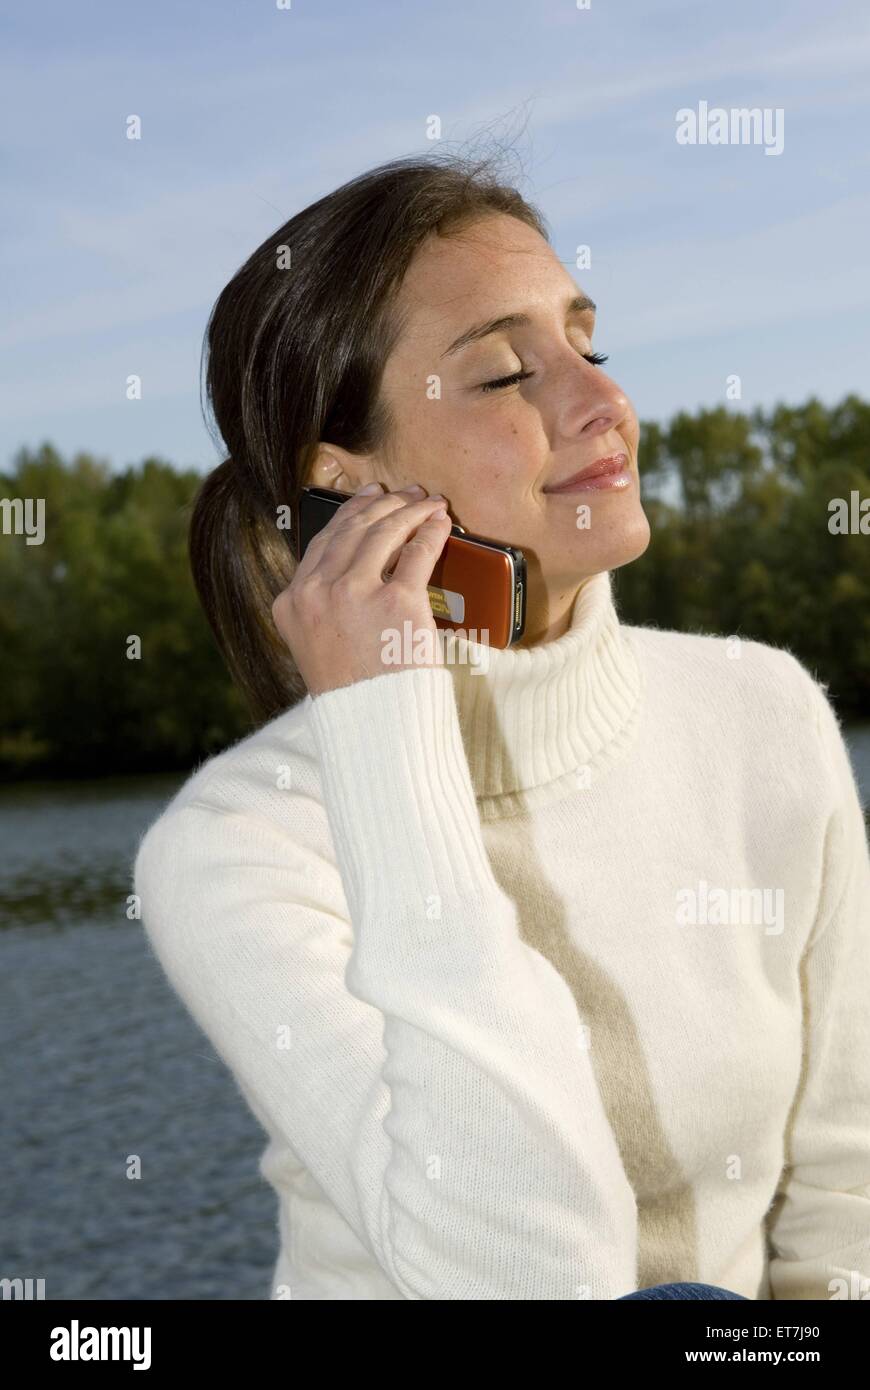 junge Frau am See telefoniert mit dem Handy, Oesterreich | young woman at a lake phoning with a mobile phone, Austria Stock Photo